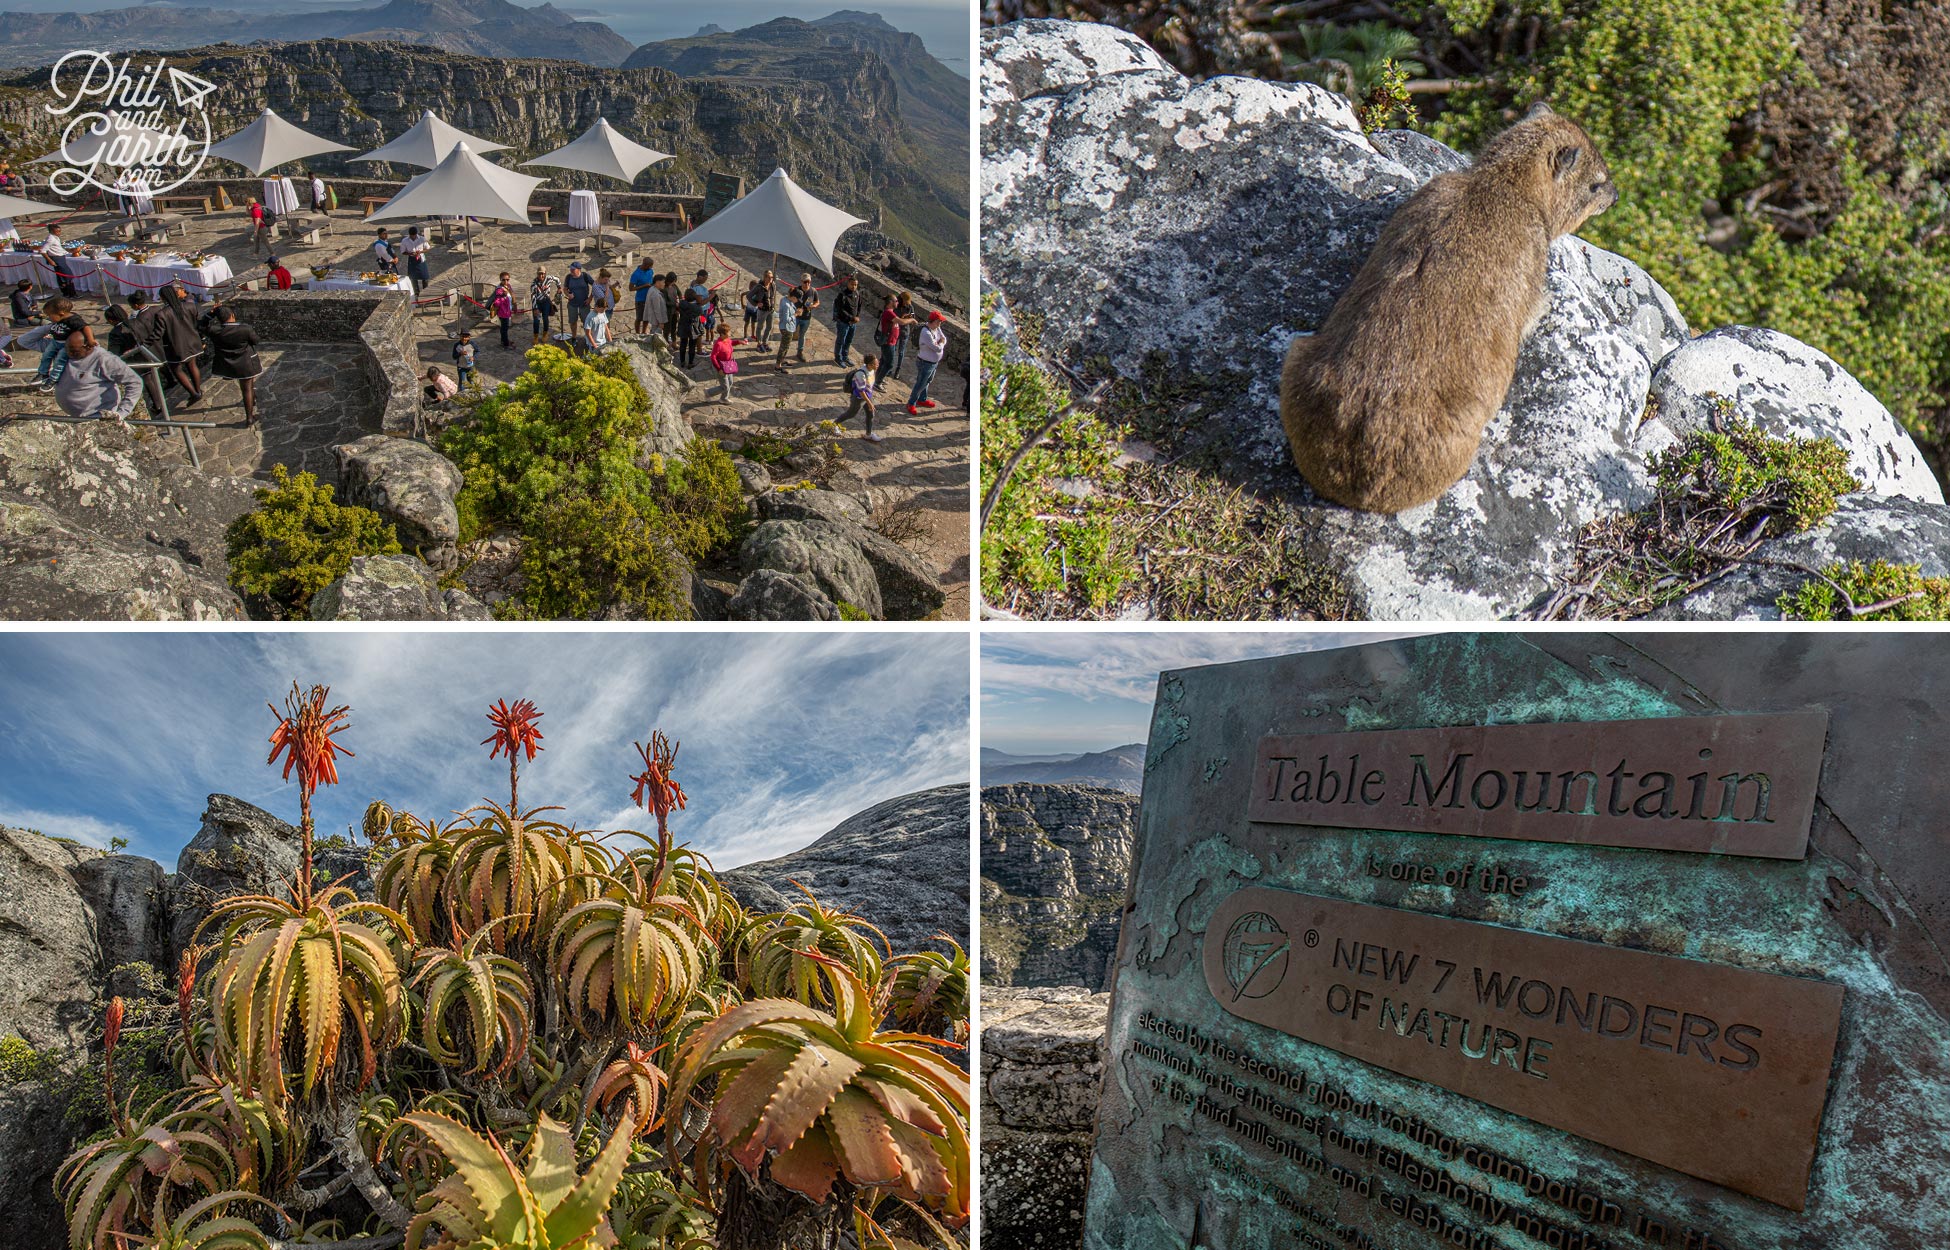 Table Mountain is now one of The 7 New Wonders Of Nature